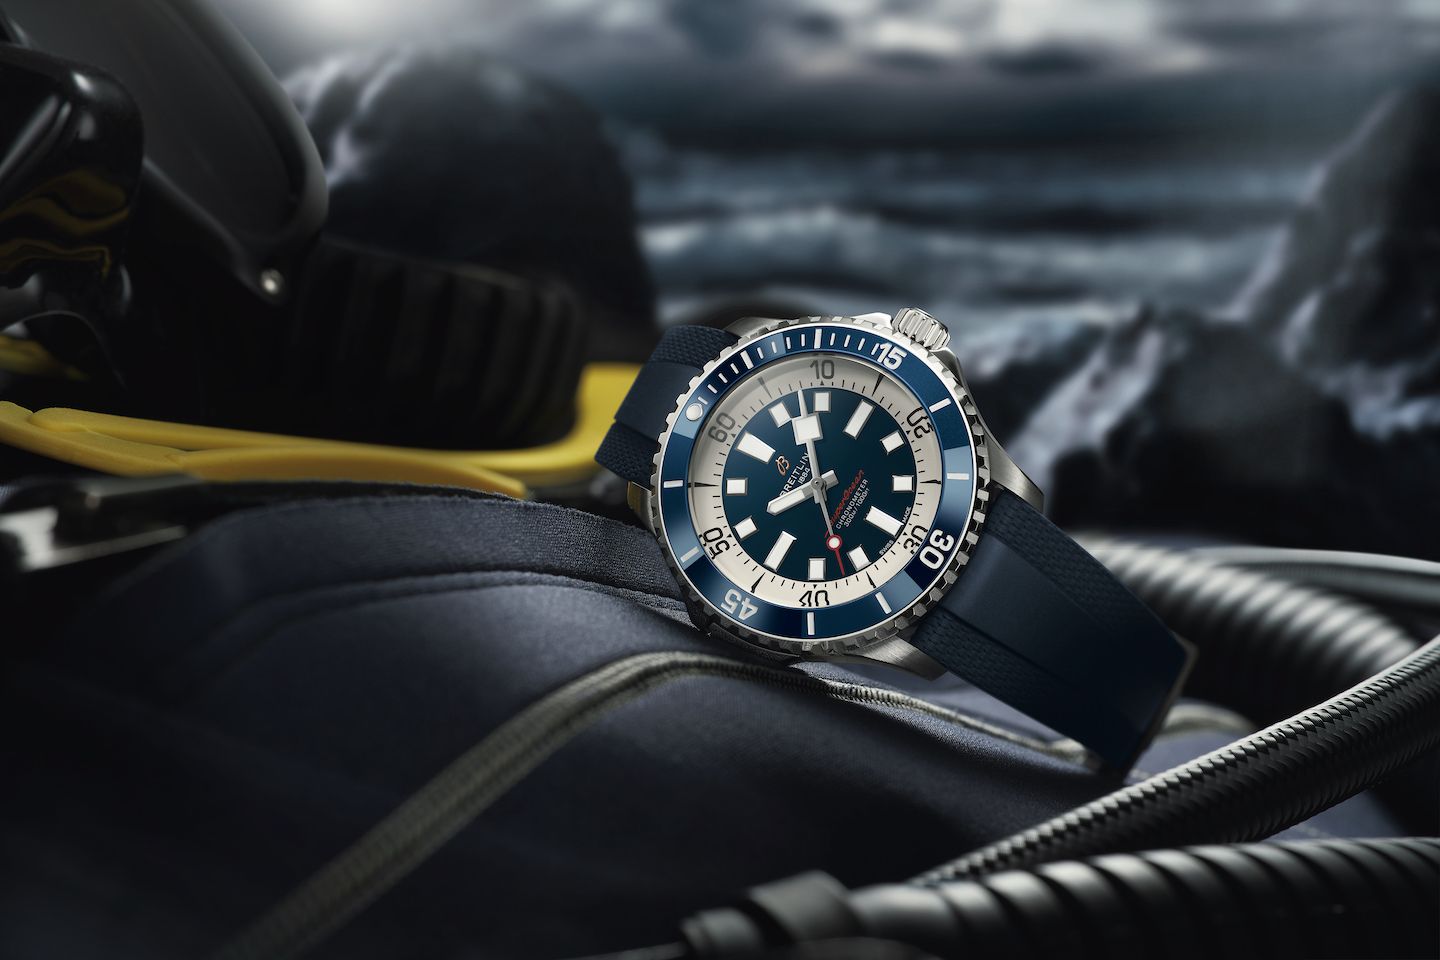 Breitling Superocean Automatic 46_blue dial and blue rubber strap_Ref. A17378E71C1S1_CMYK